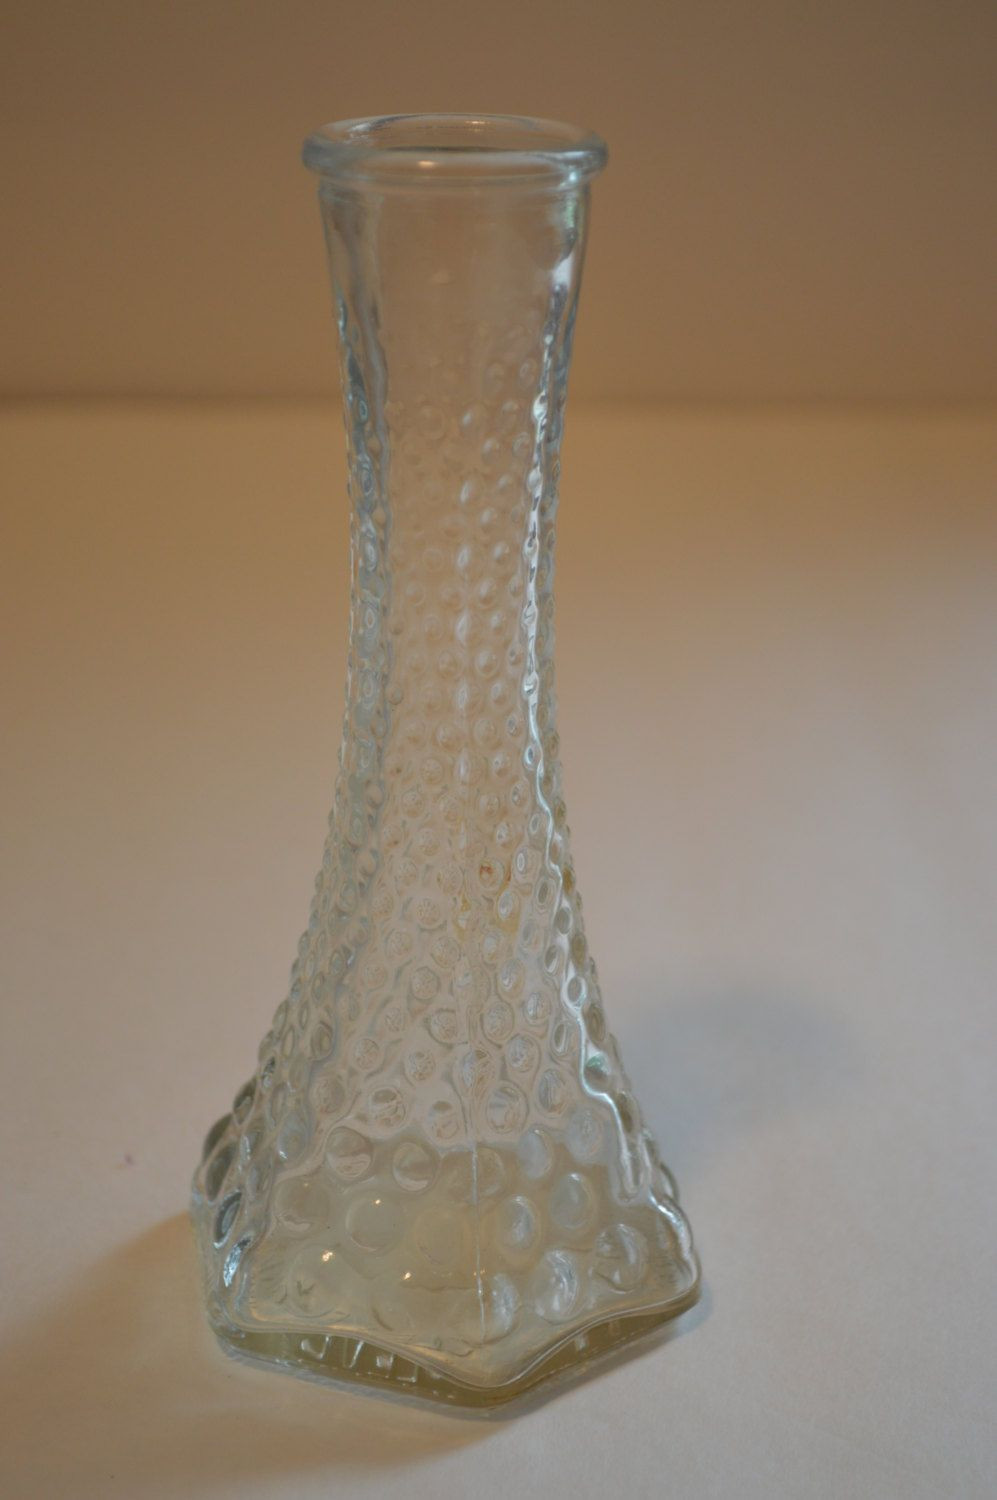 10 attractive Gorham Lady Anne Crystal Bud Vase 2024 free download gorham lady anne crystal bud vase of e o brody 175 bud vase vintage small clear glass e o brody co vase for e o brody 175 bud vase vintage small clear glass e o brody co vase vintage glass b